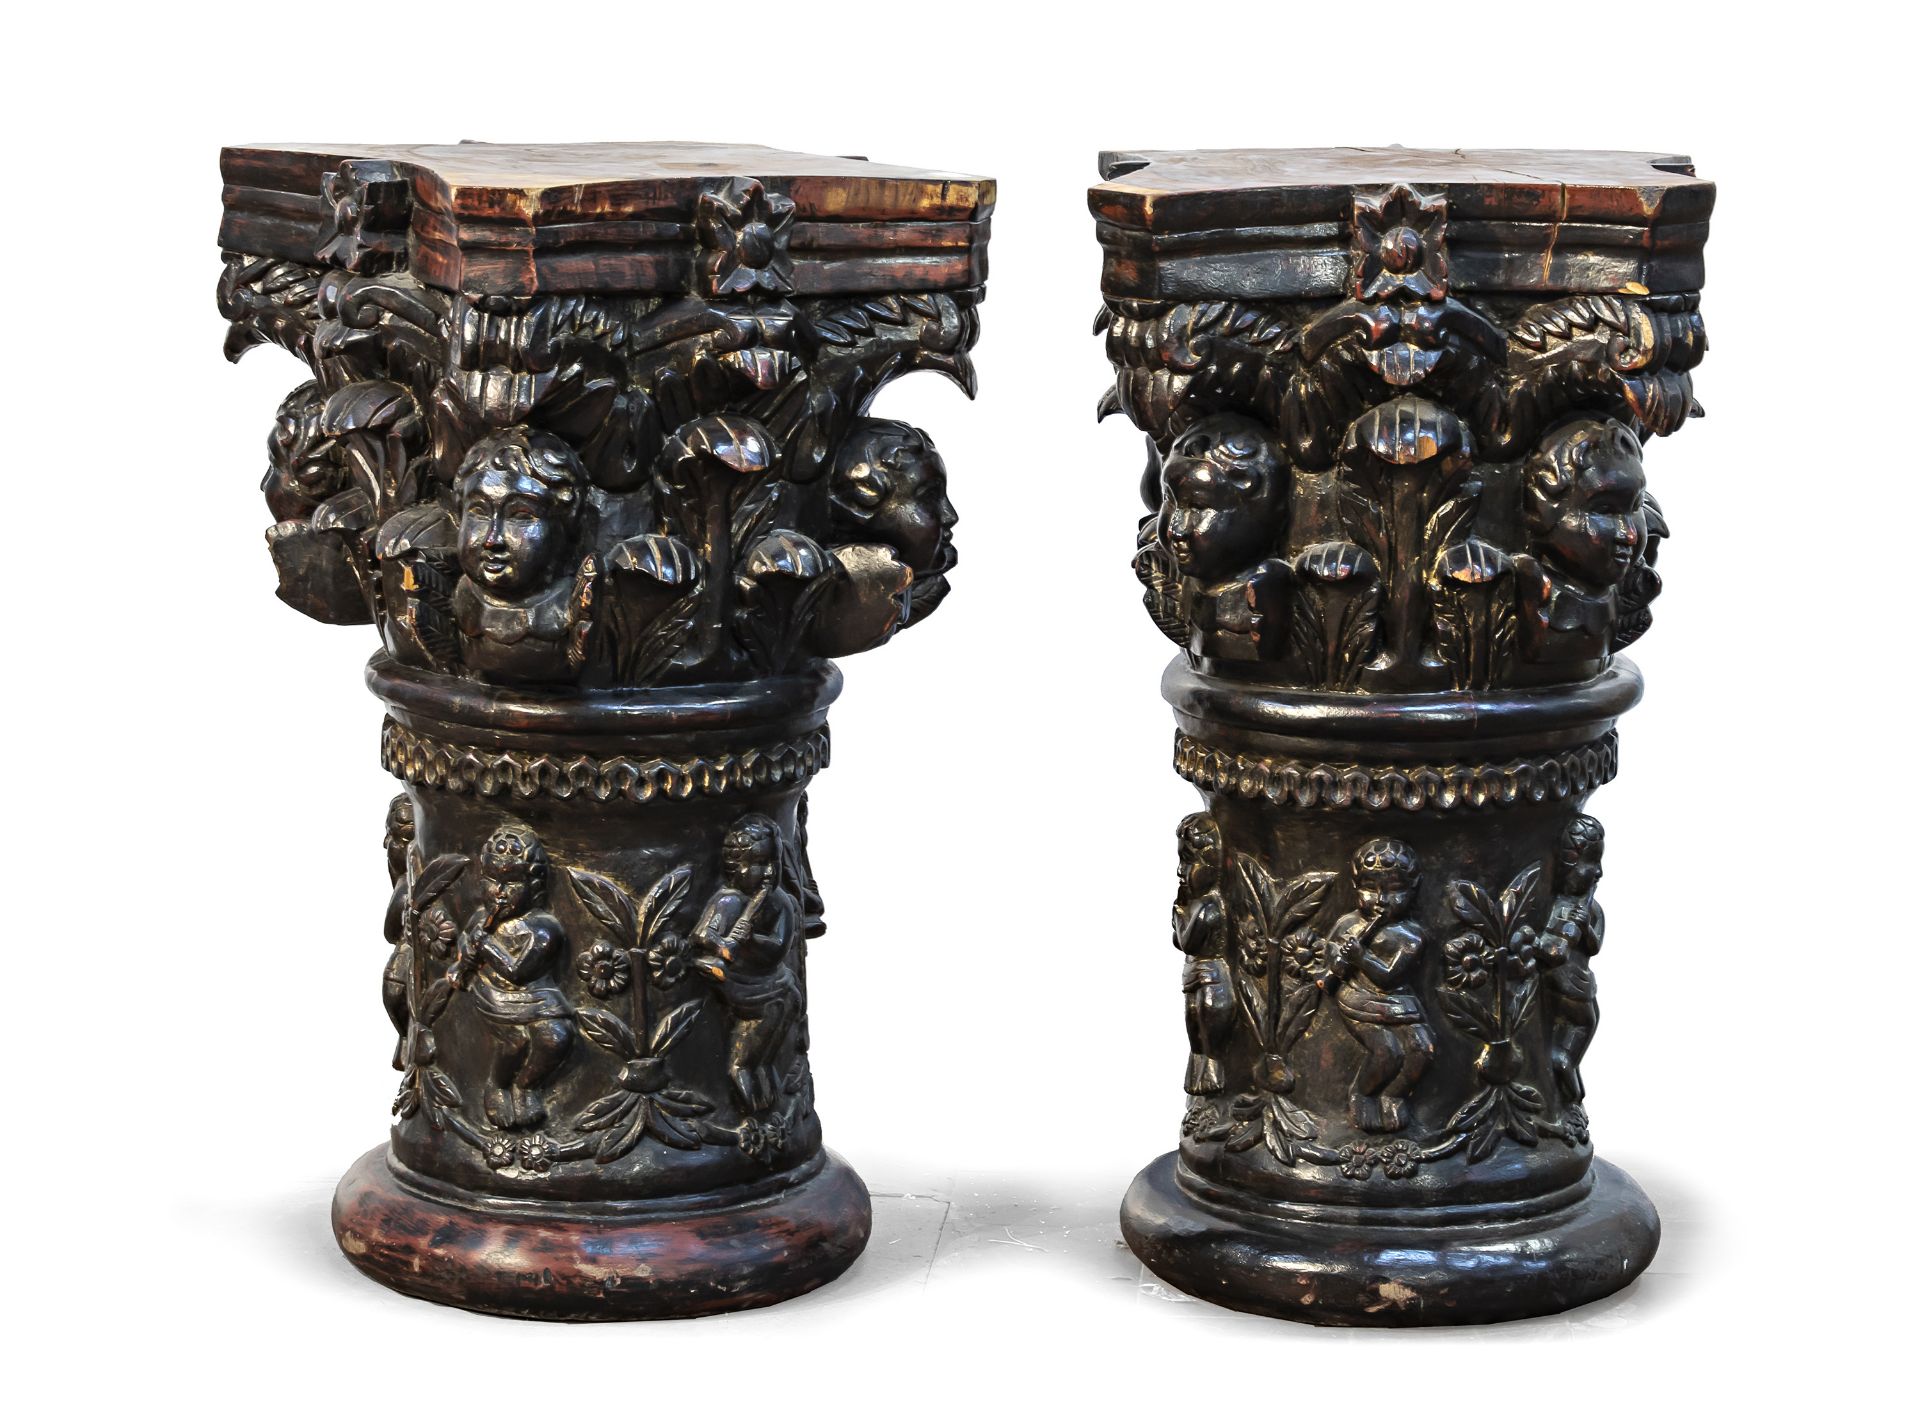 PAIR OF WALNUT WOOD CAPITALS END OF THE 19TH CENTURY